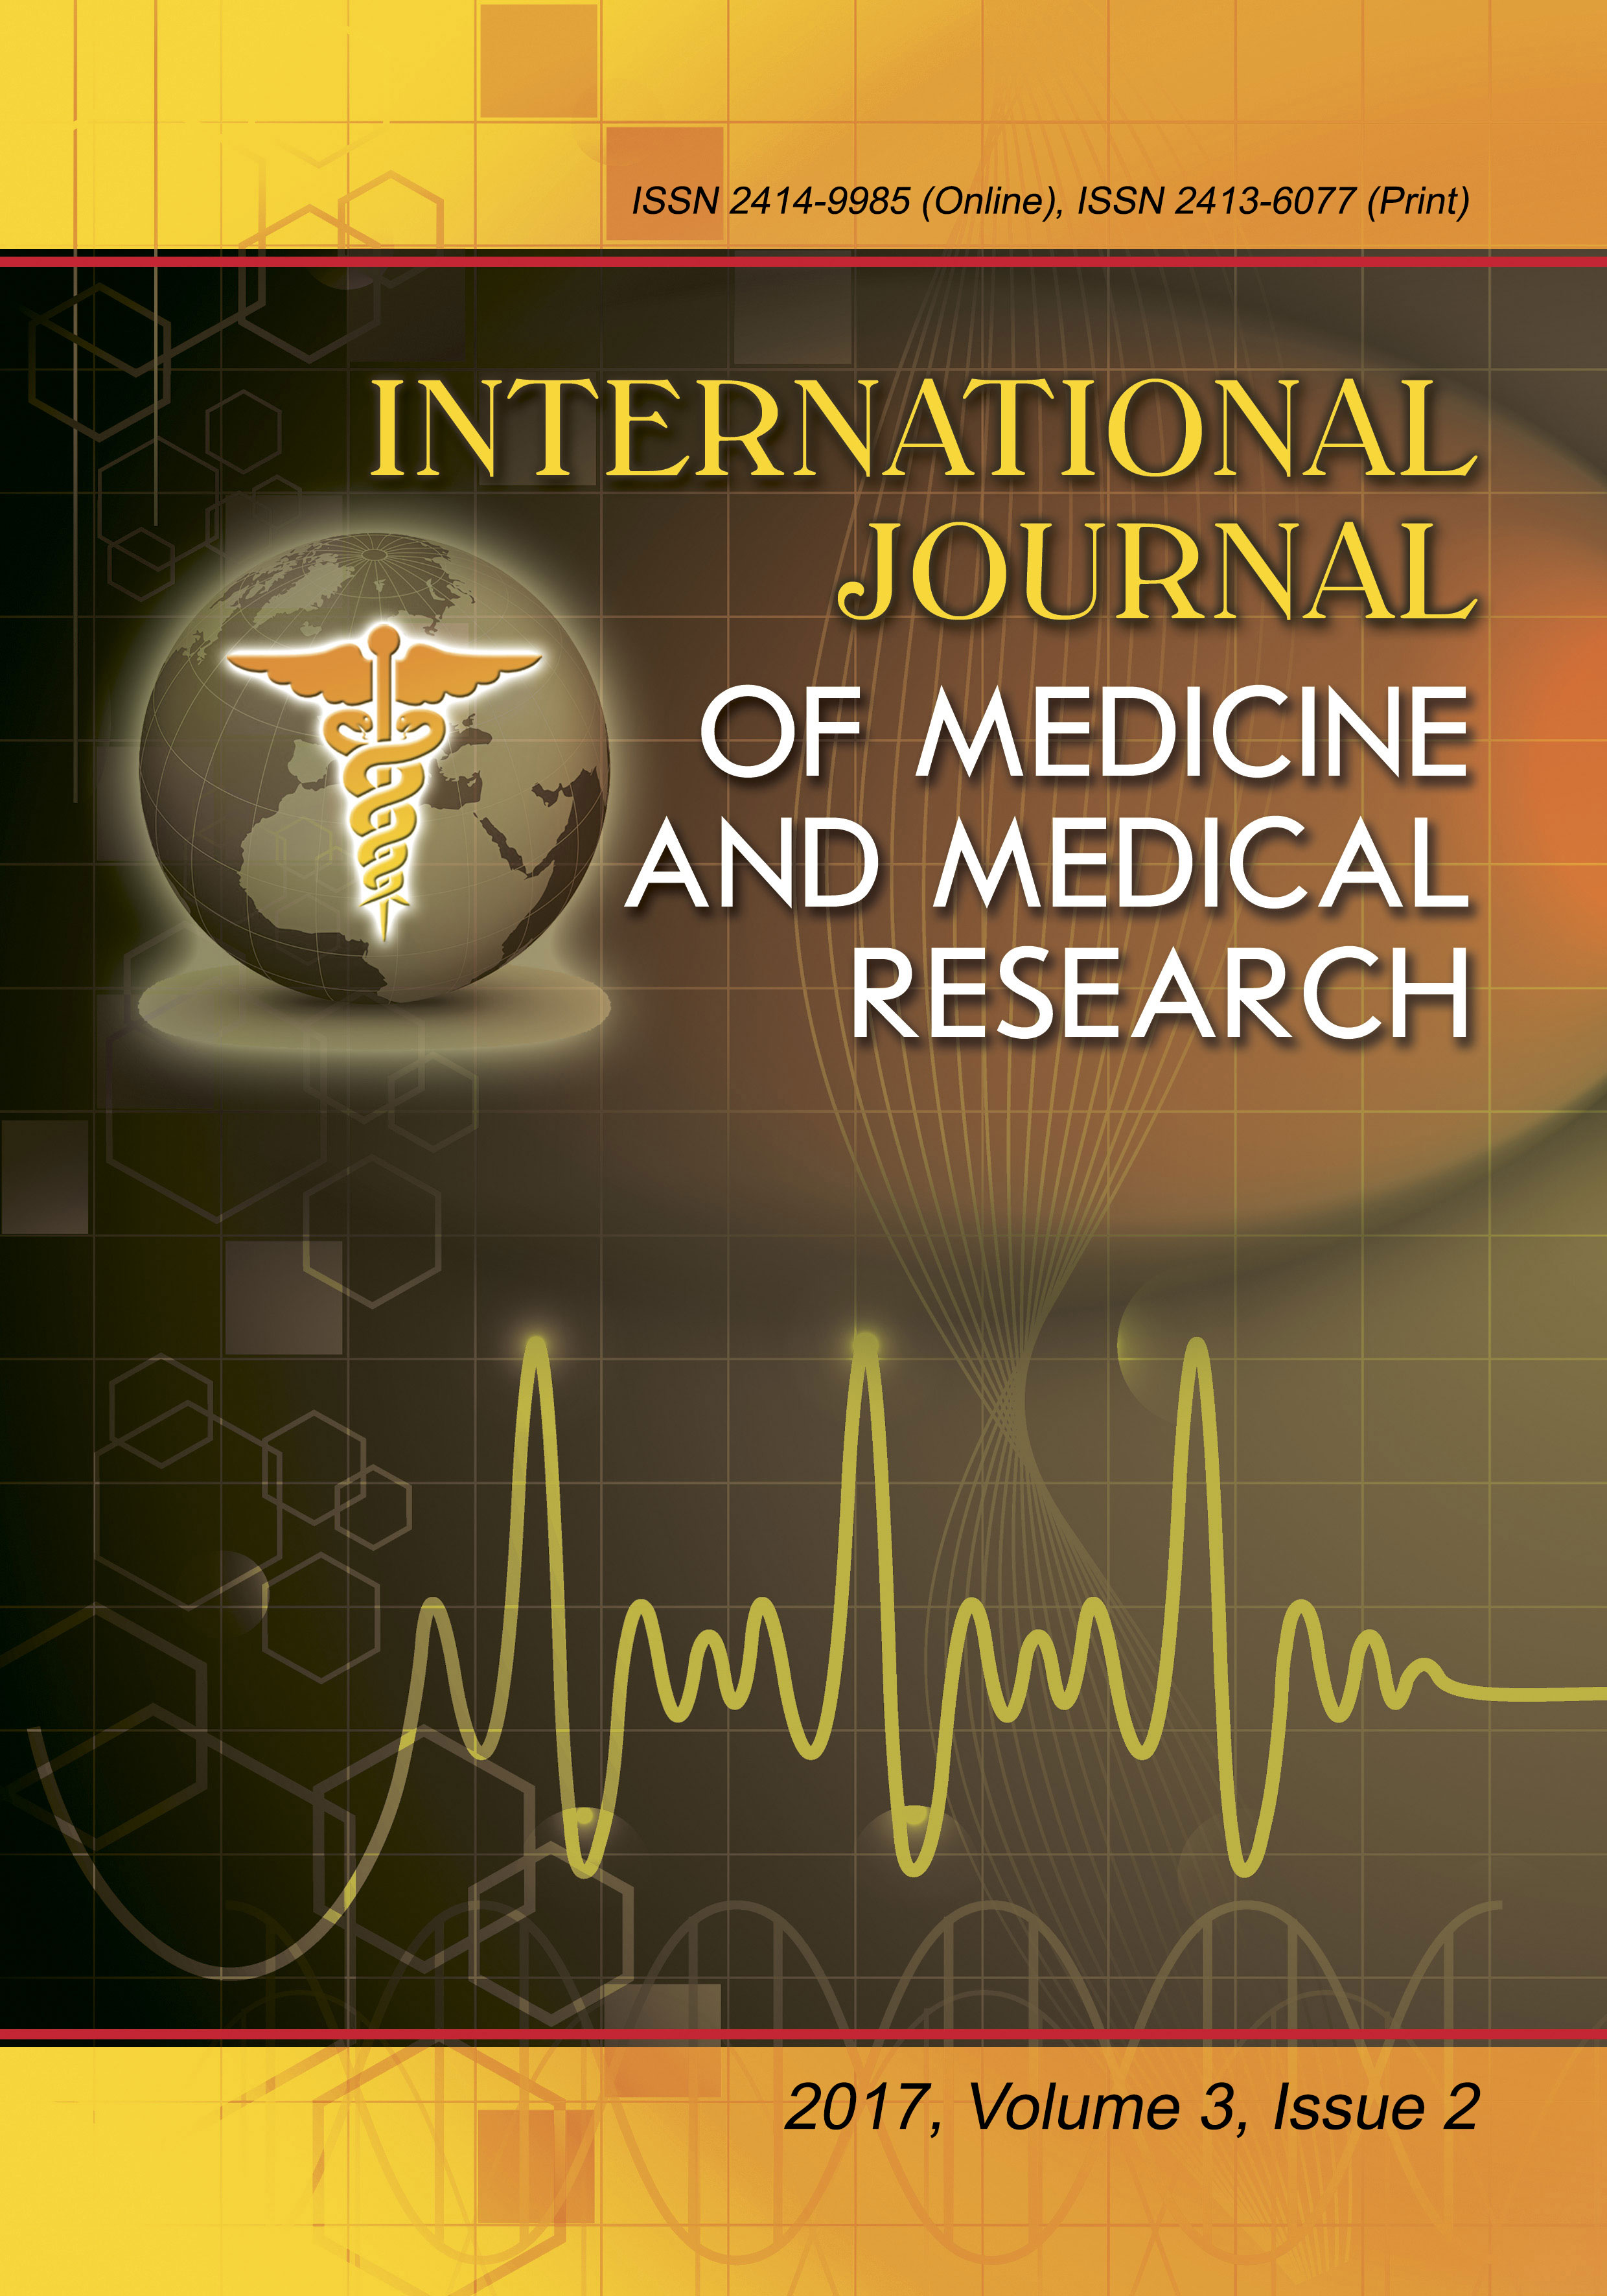 					View Vol. 3 No. 2 (2017): International Journal of Medicine and Medical Research
				